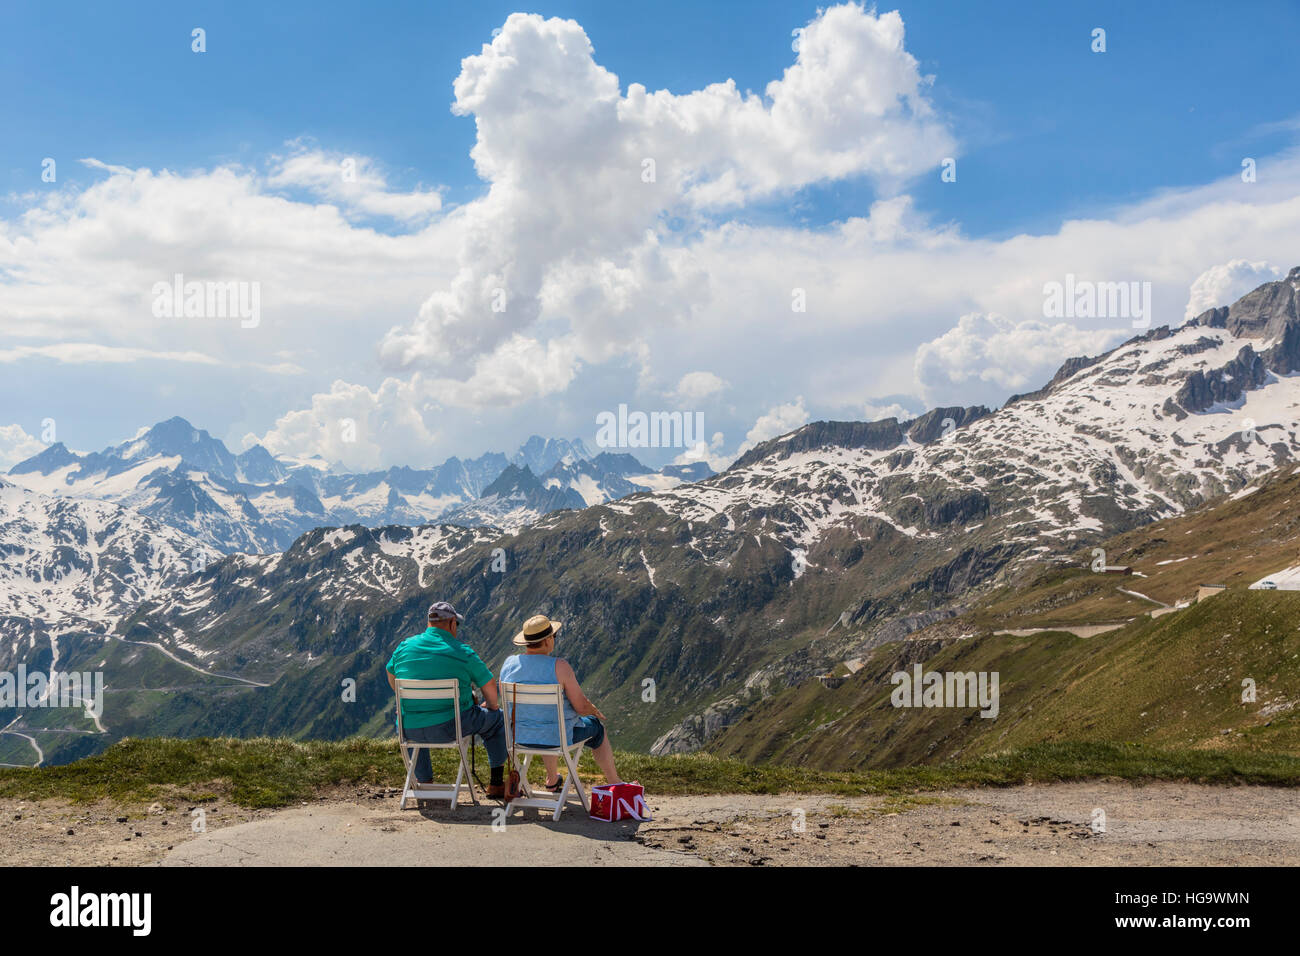 Third age couple admiring view in the Furka Pass, Swiss Alps, Valais Canton, Switzerland. Stock Photo